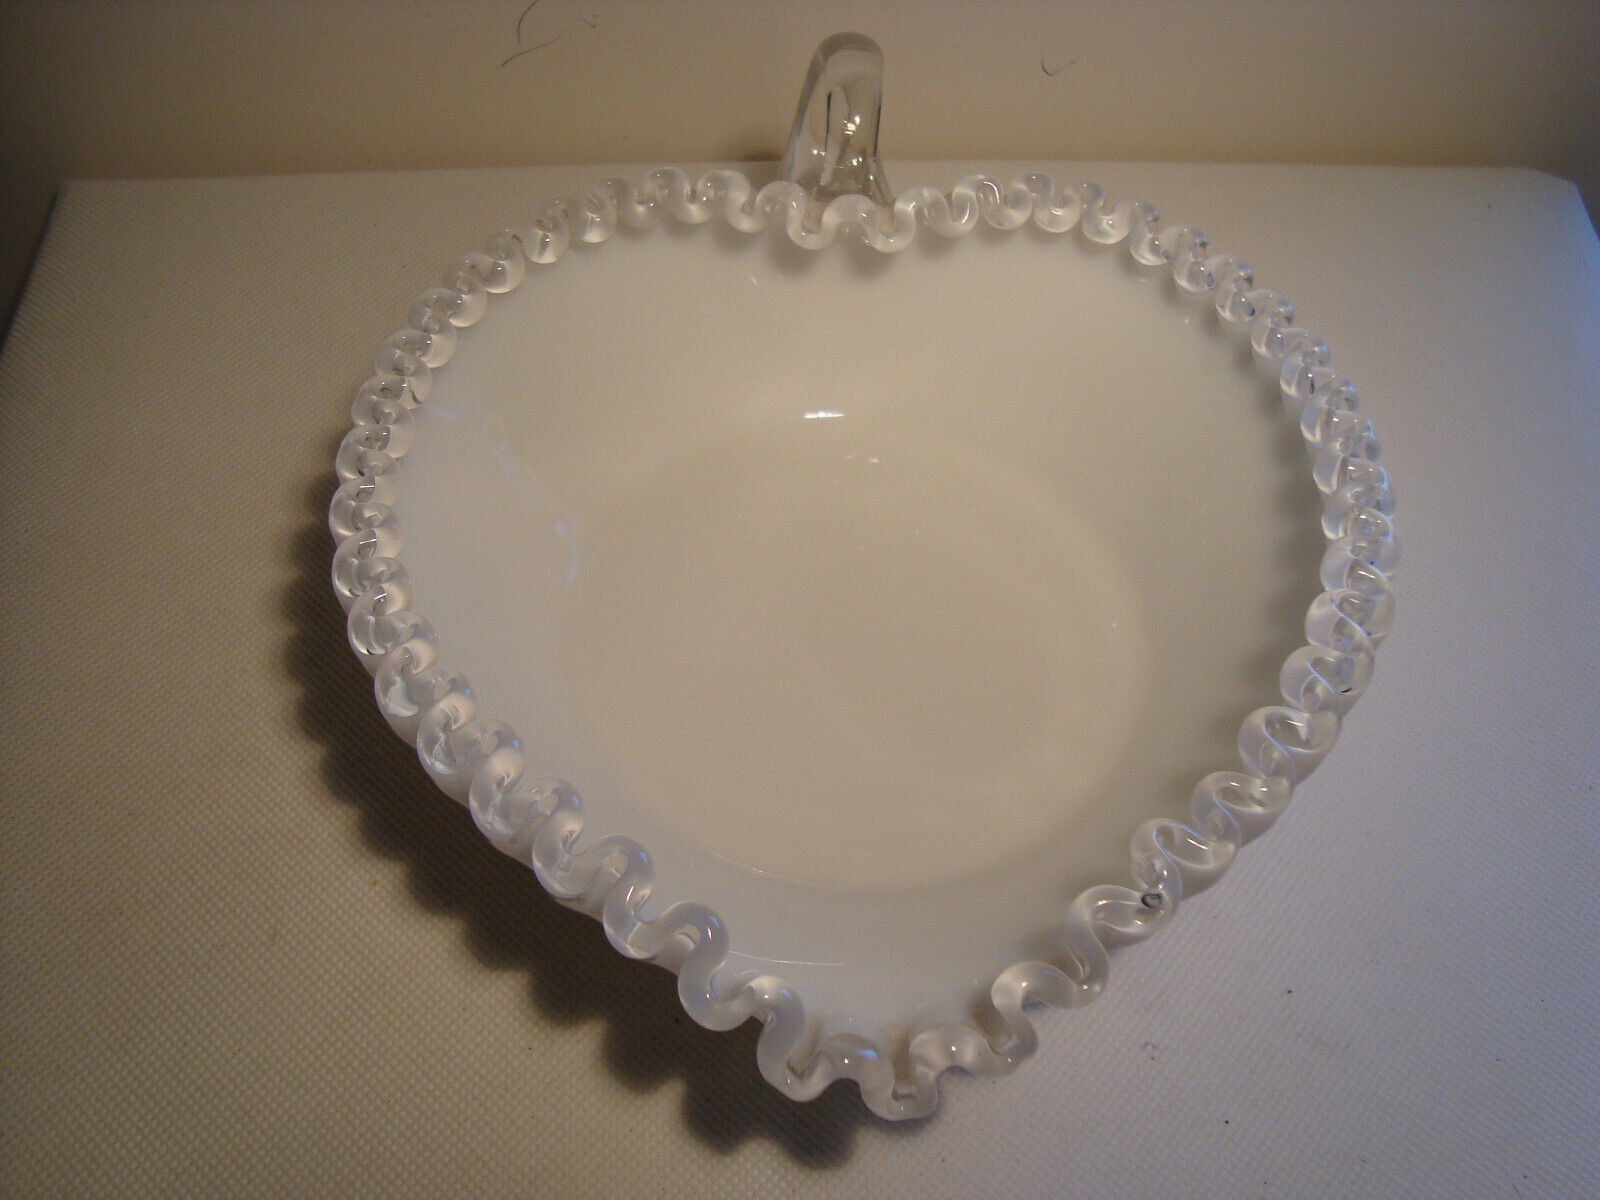 Primary image for Fenton, white milk glass heart shape candy dish in the silver crest pattern.